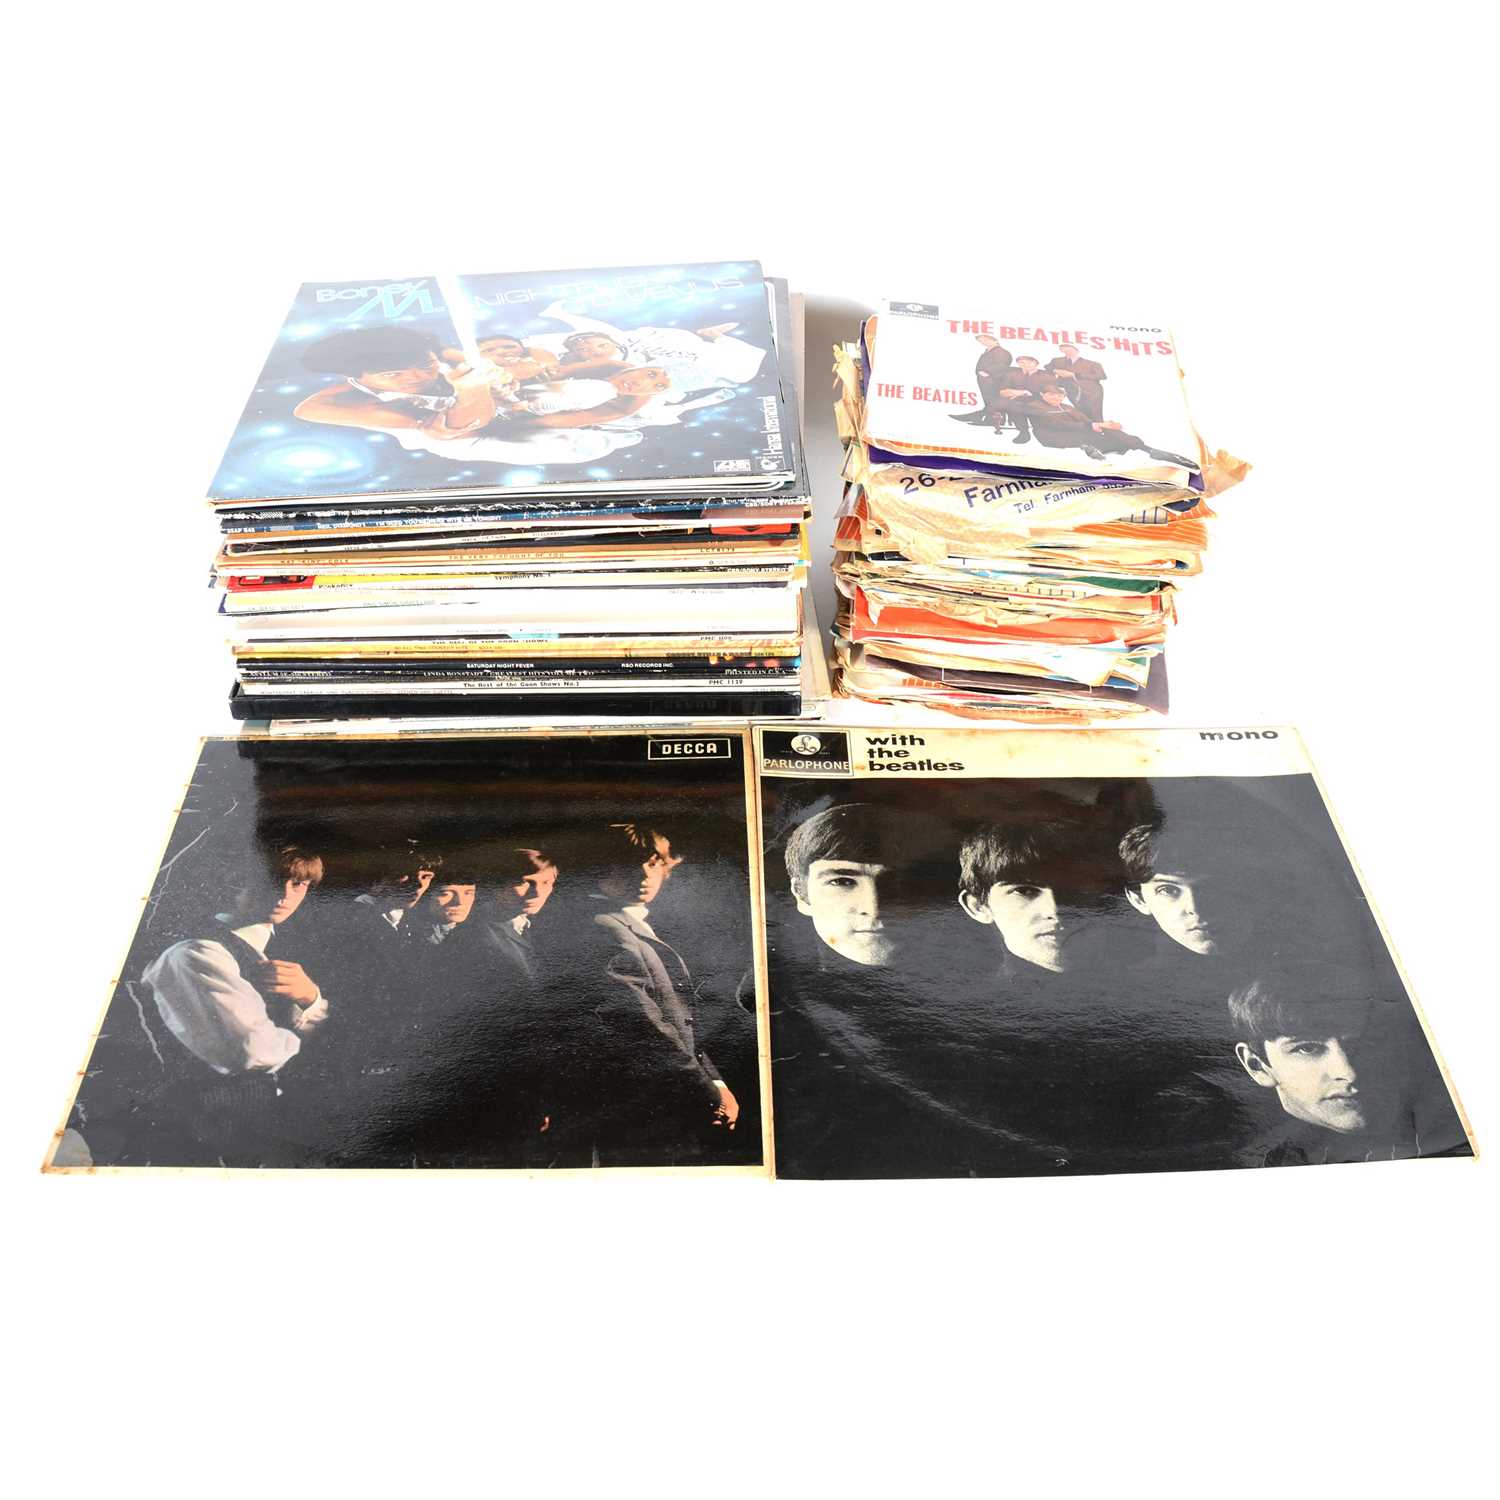 Lot 152 - LP and 7" vinyl music records, including The Rolling Stones and The Beatles.